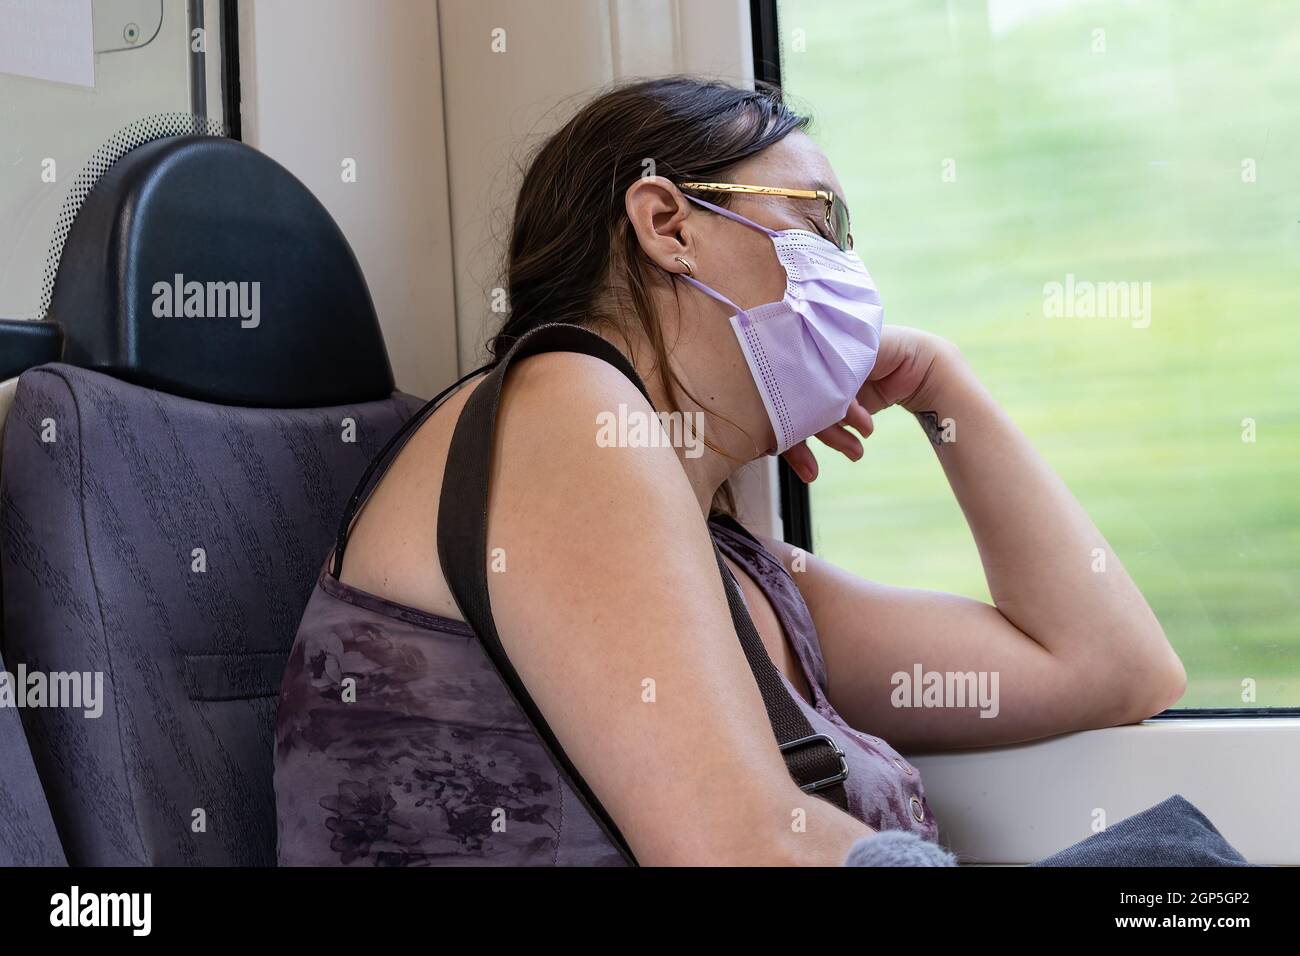 Barcelona, Spain - September 21, 2021: Exhausted woman take a nap on the train during her way to home. She is using a protective face mask due to coro Stock Photo